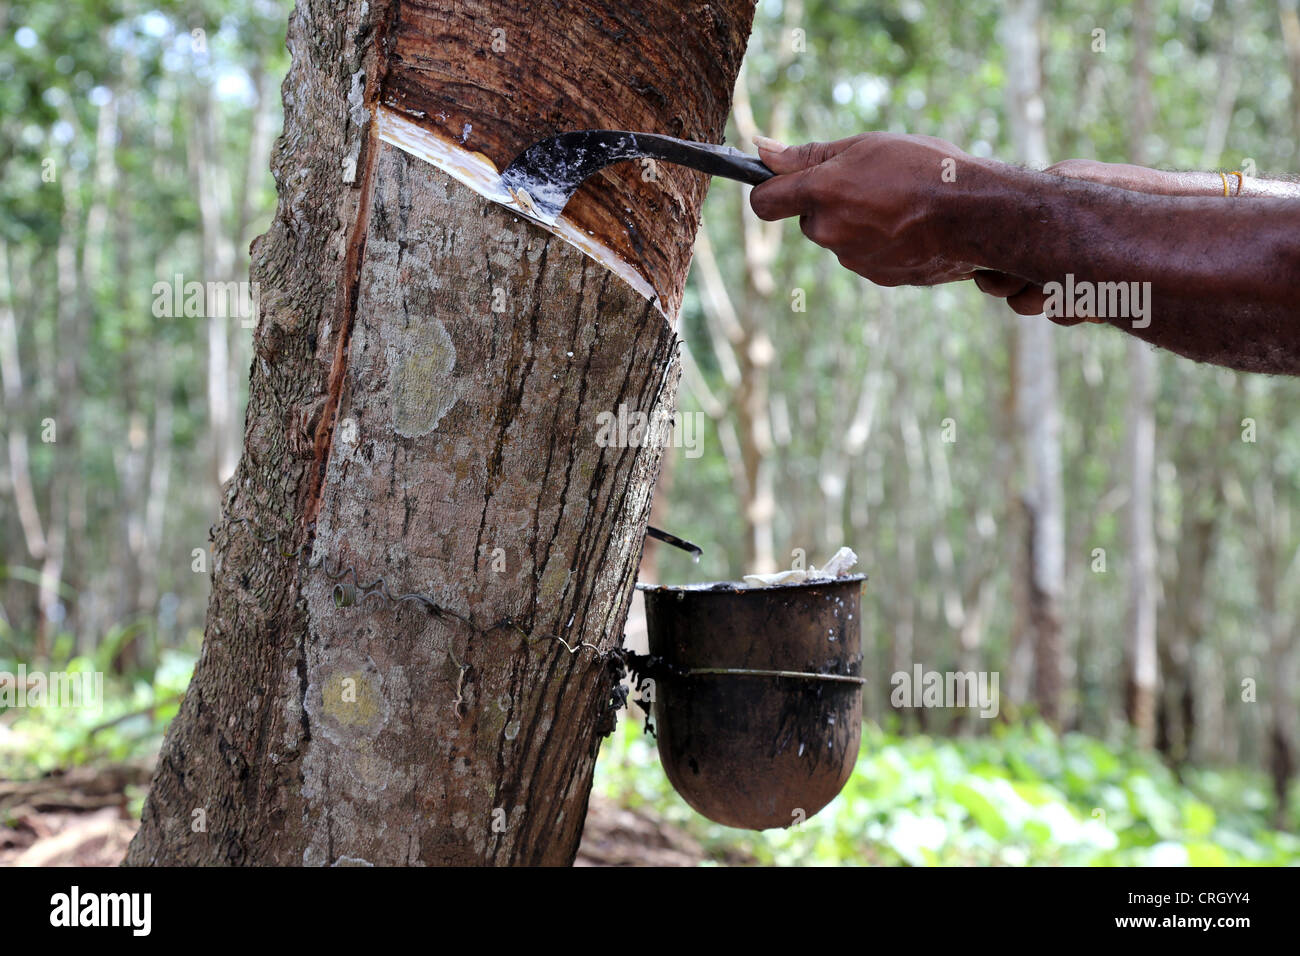 Extraction of latex from rubber trees, Central Province, Papua New Guinea Stock Photo